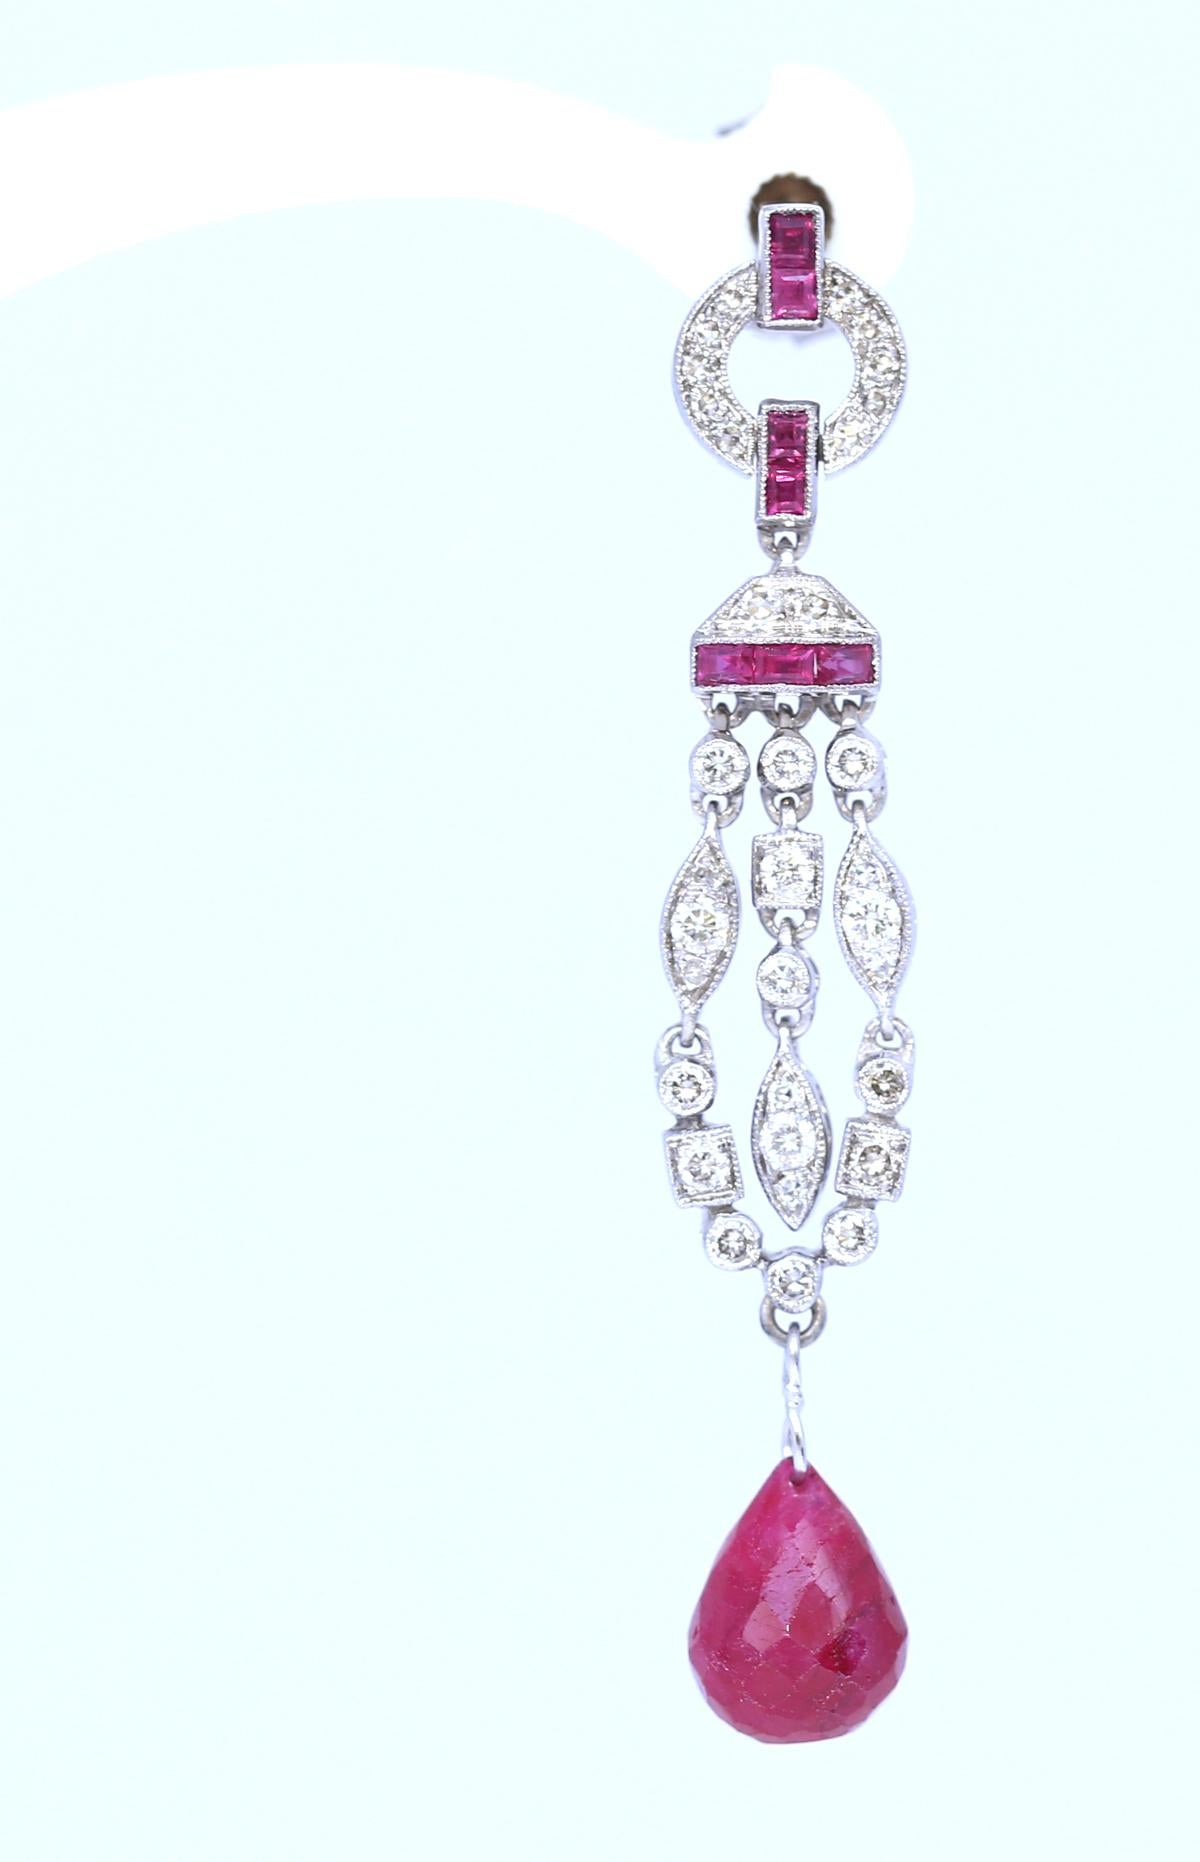 Art Deco Style Baguette Briolet Rubies Diamonds Earrings, Created around the 1970.

Perfectly matching the Art Deco style with different geometrical forms and shapes. Baguette Rubies in red lines, Briolet Rubies, almost droplet shape in the bottom.